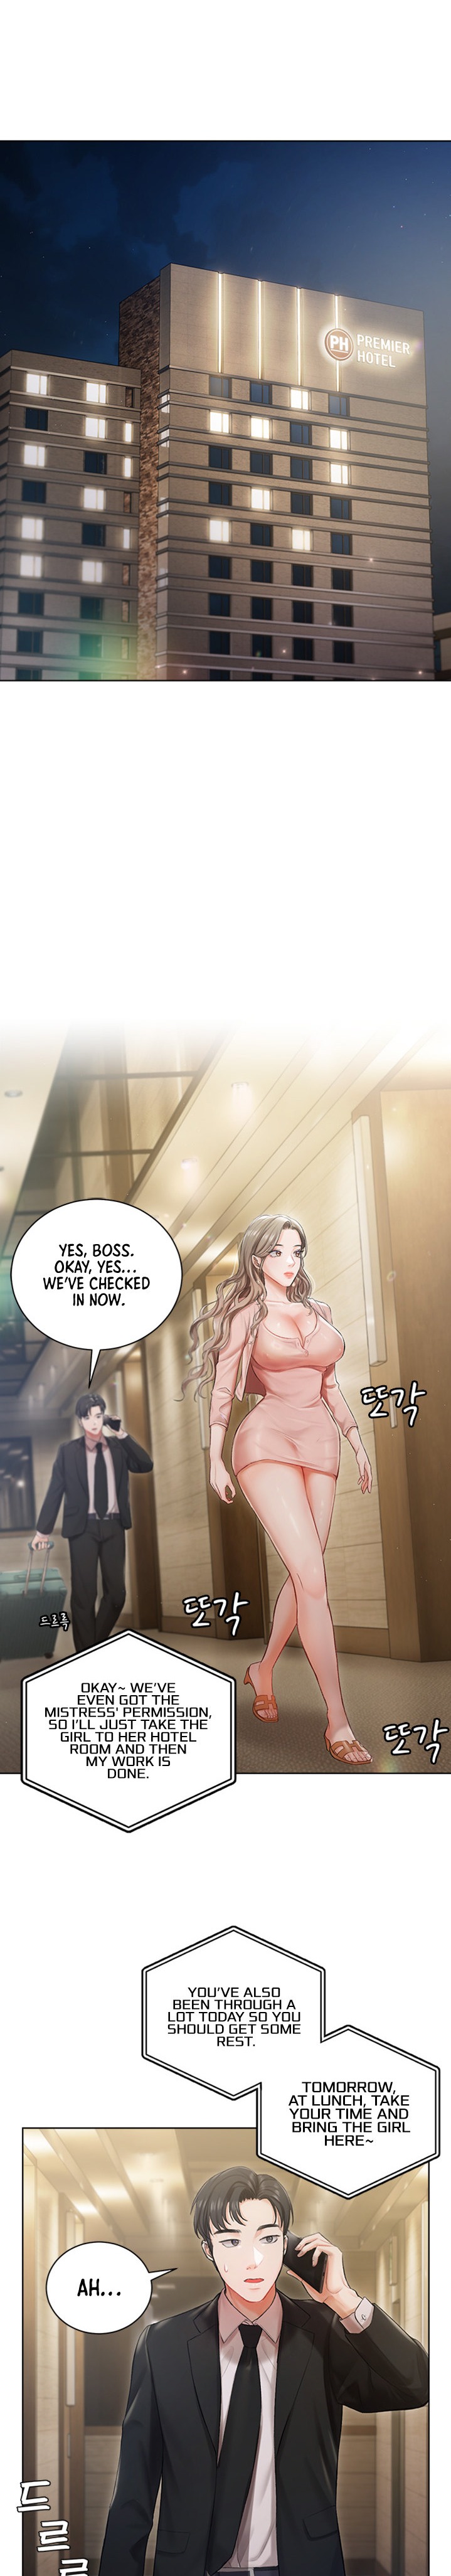 Hyeonjung’s Residence - Chapter 2 Page 11